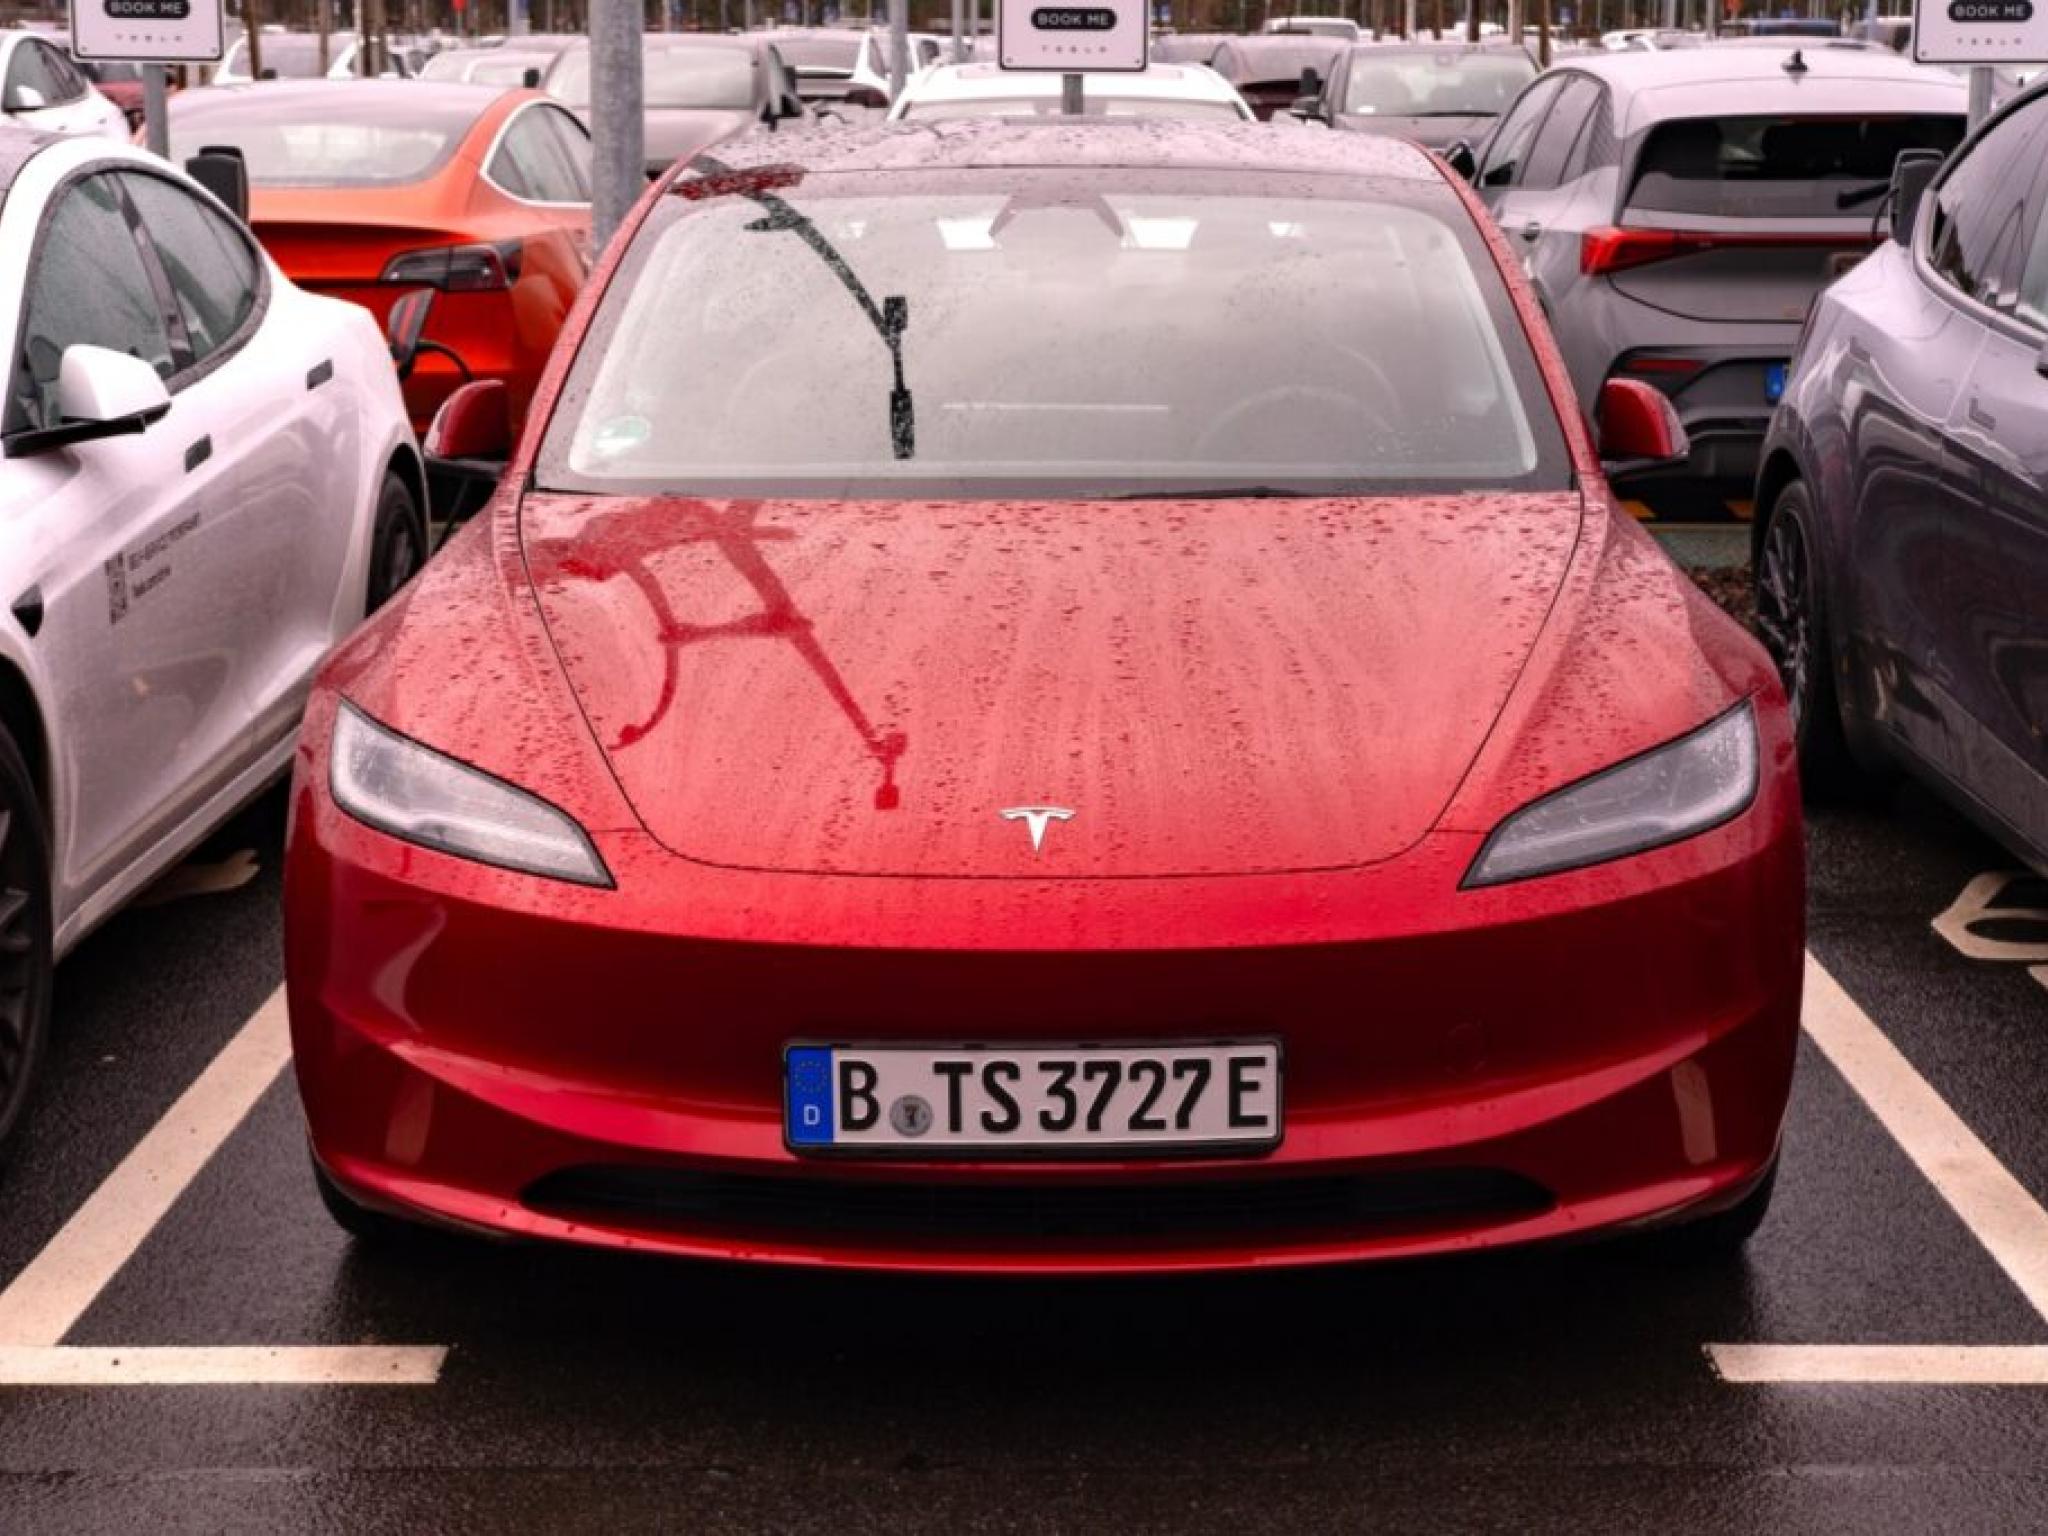  tesla-warns-of-model-3-price-hike-in-eu-due-to-tariffs-recommends-customers-to-take-delivery-in-june-to-secure-current-price 